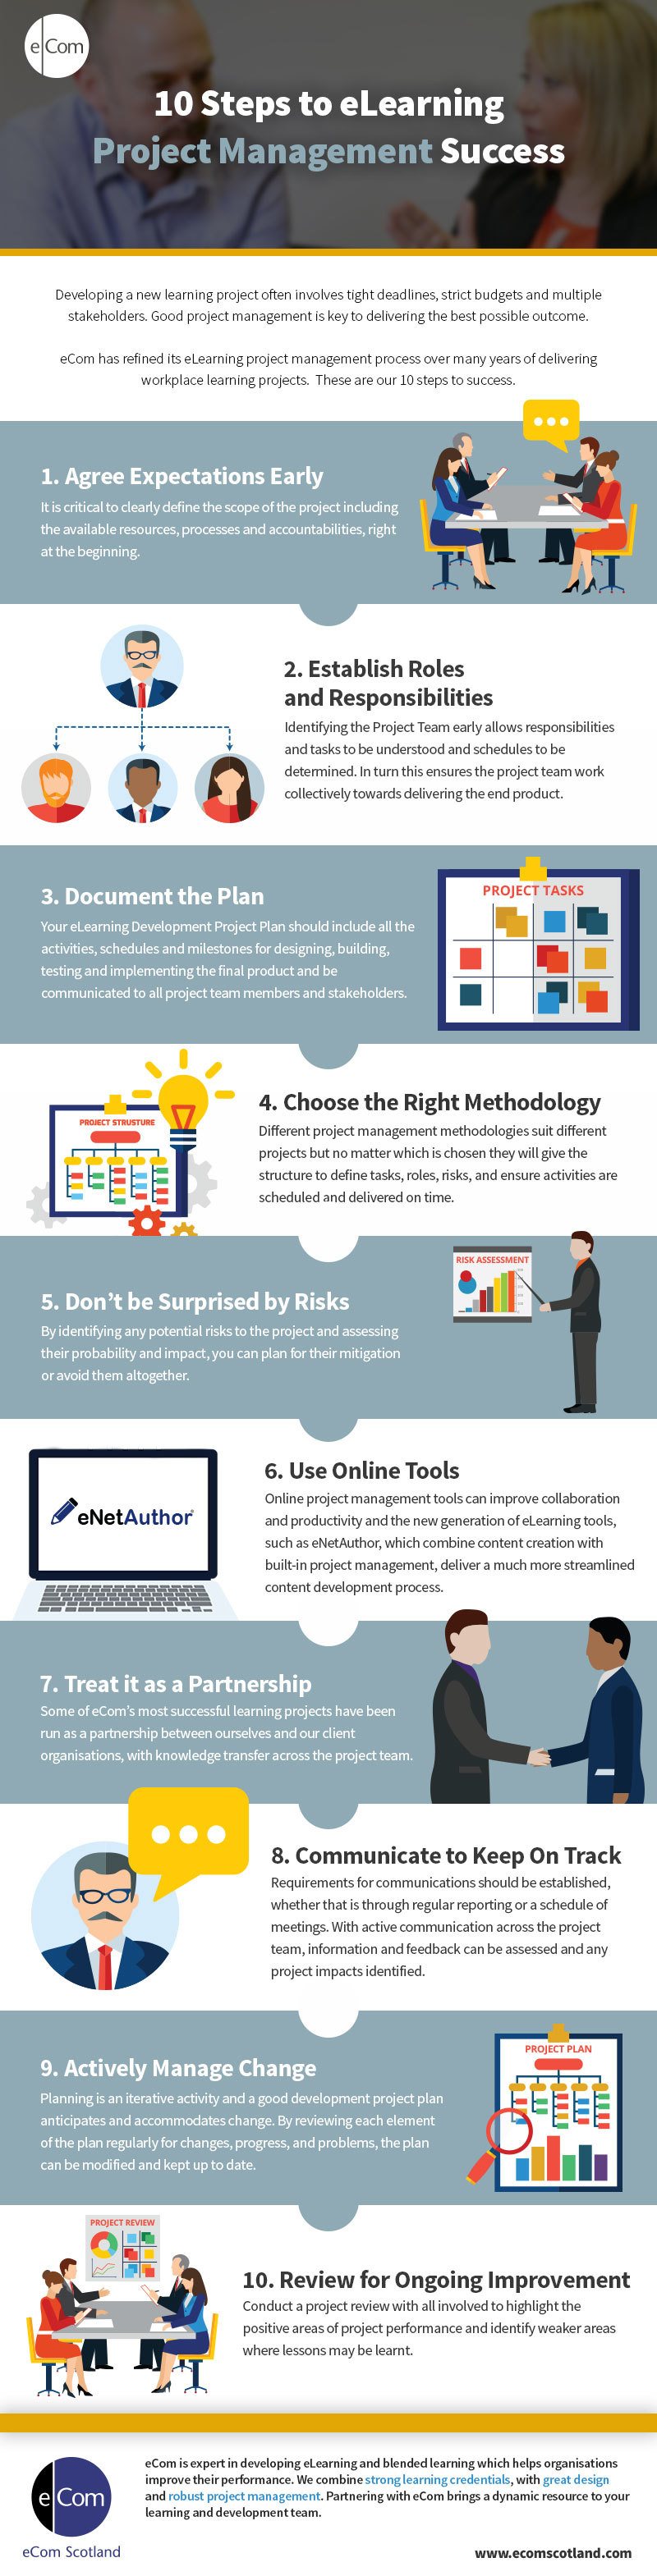 10 Steps to eLearning Project Management Success Infographic